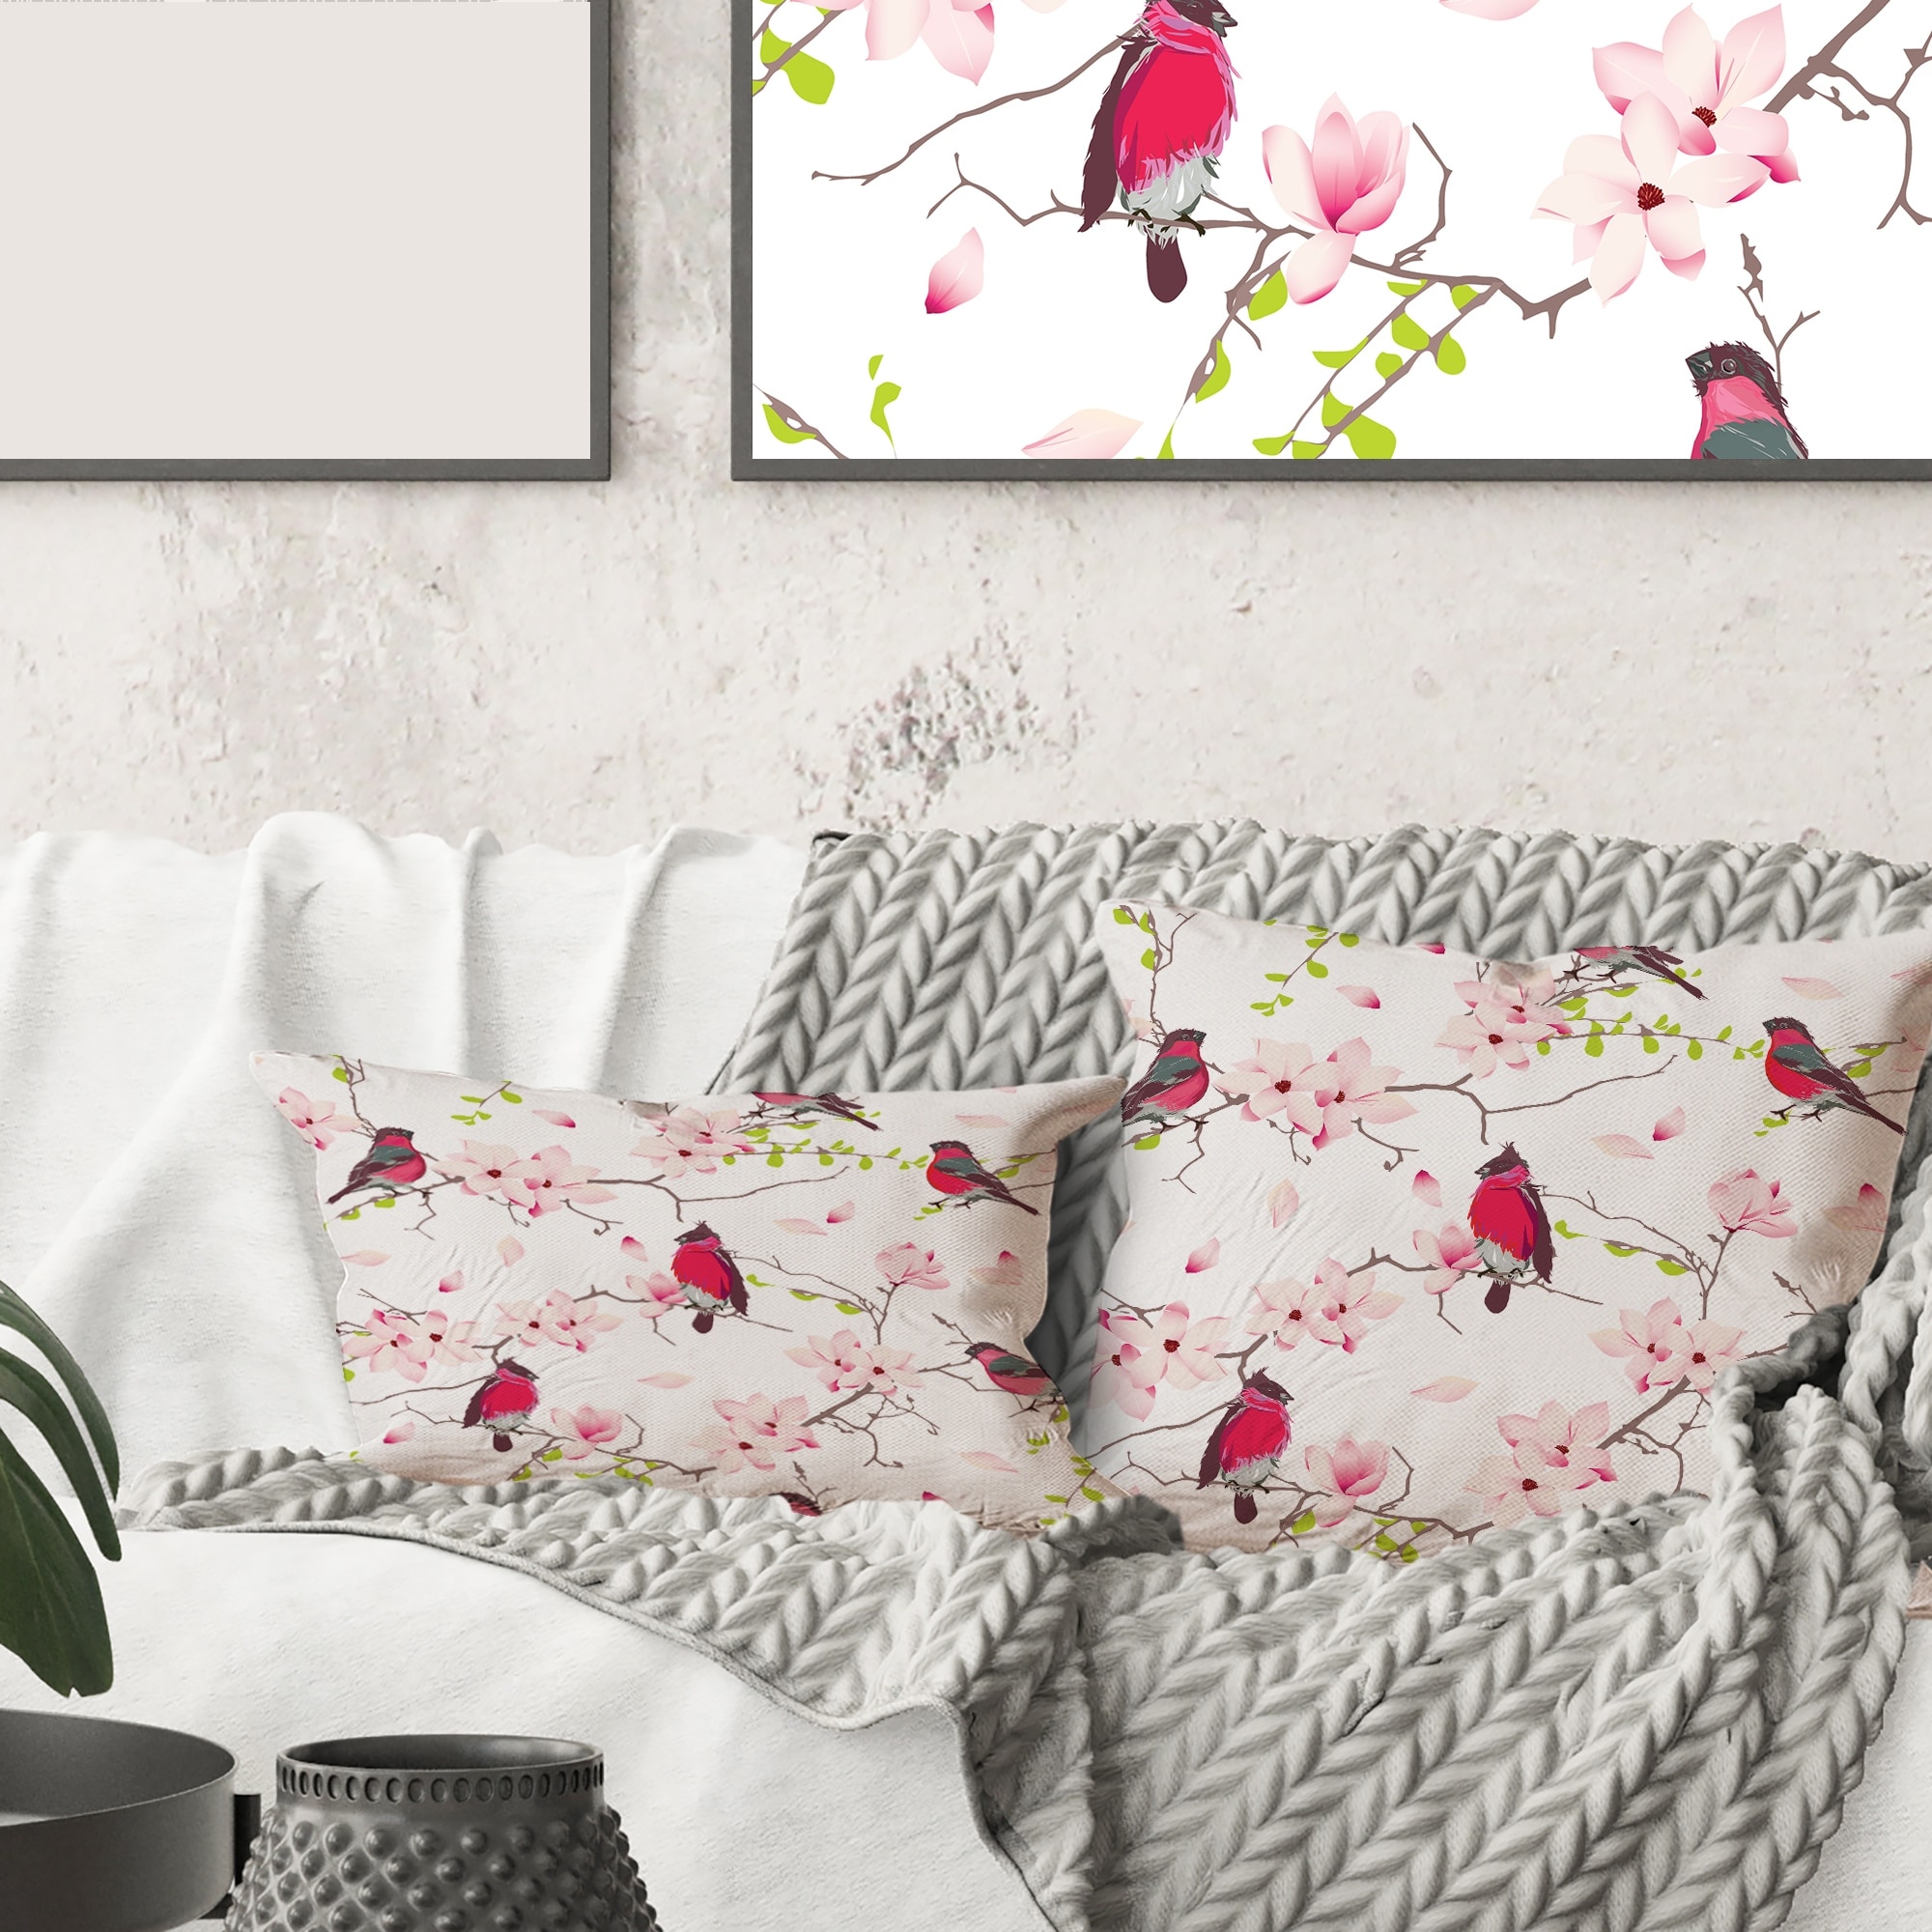 https://ak1.ostkcdn.com/images/products/is/images/direct/c3ca8bf8b22ff7a304c08fc311d2ef98c8dbdbf3/Designart-%27Red-Bullfinches-On-Magnolia-Tree%27-Traditional-Printed-Throw-Pillow.jpg